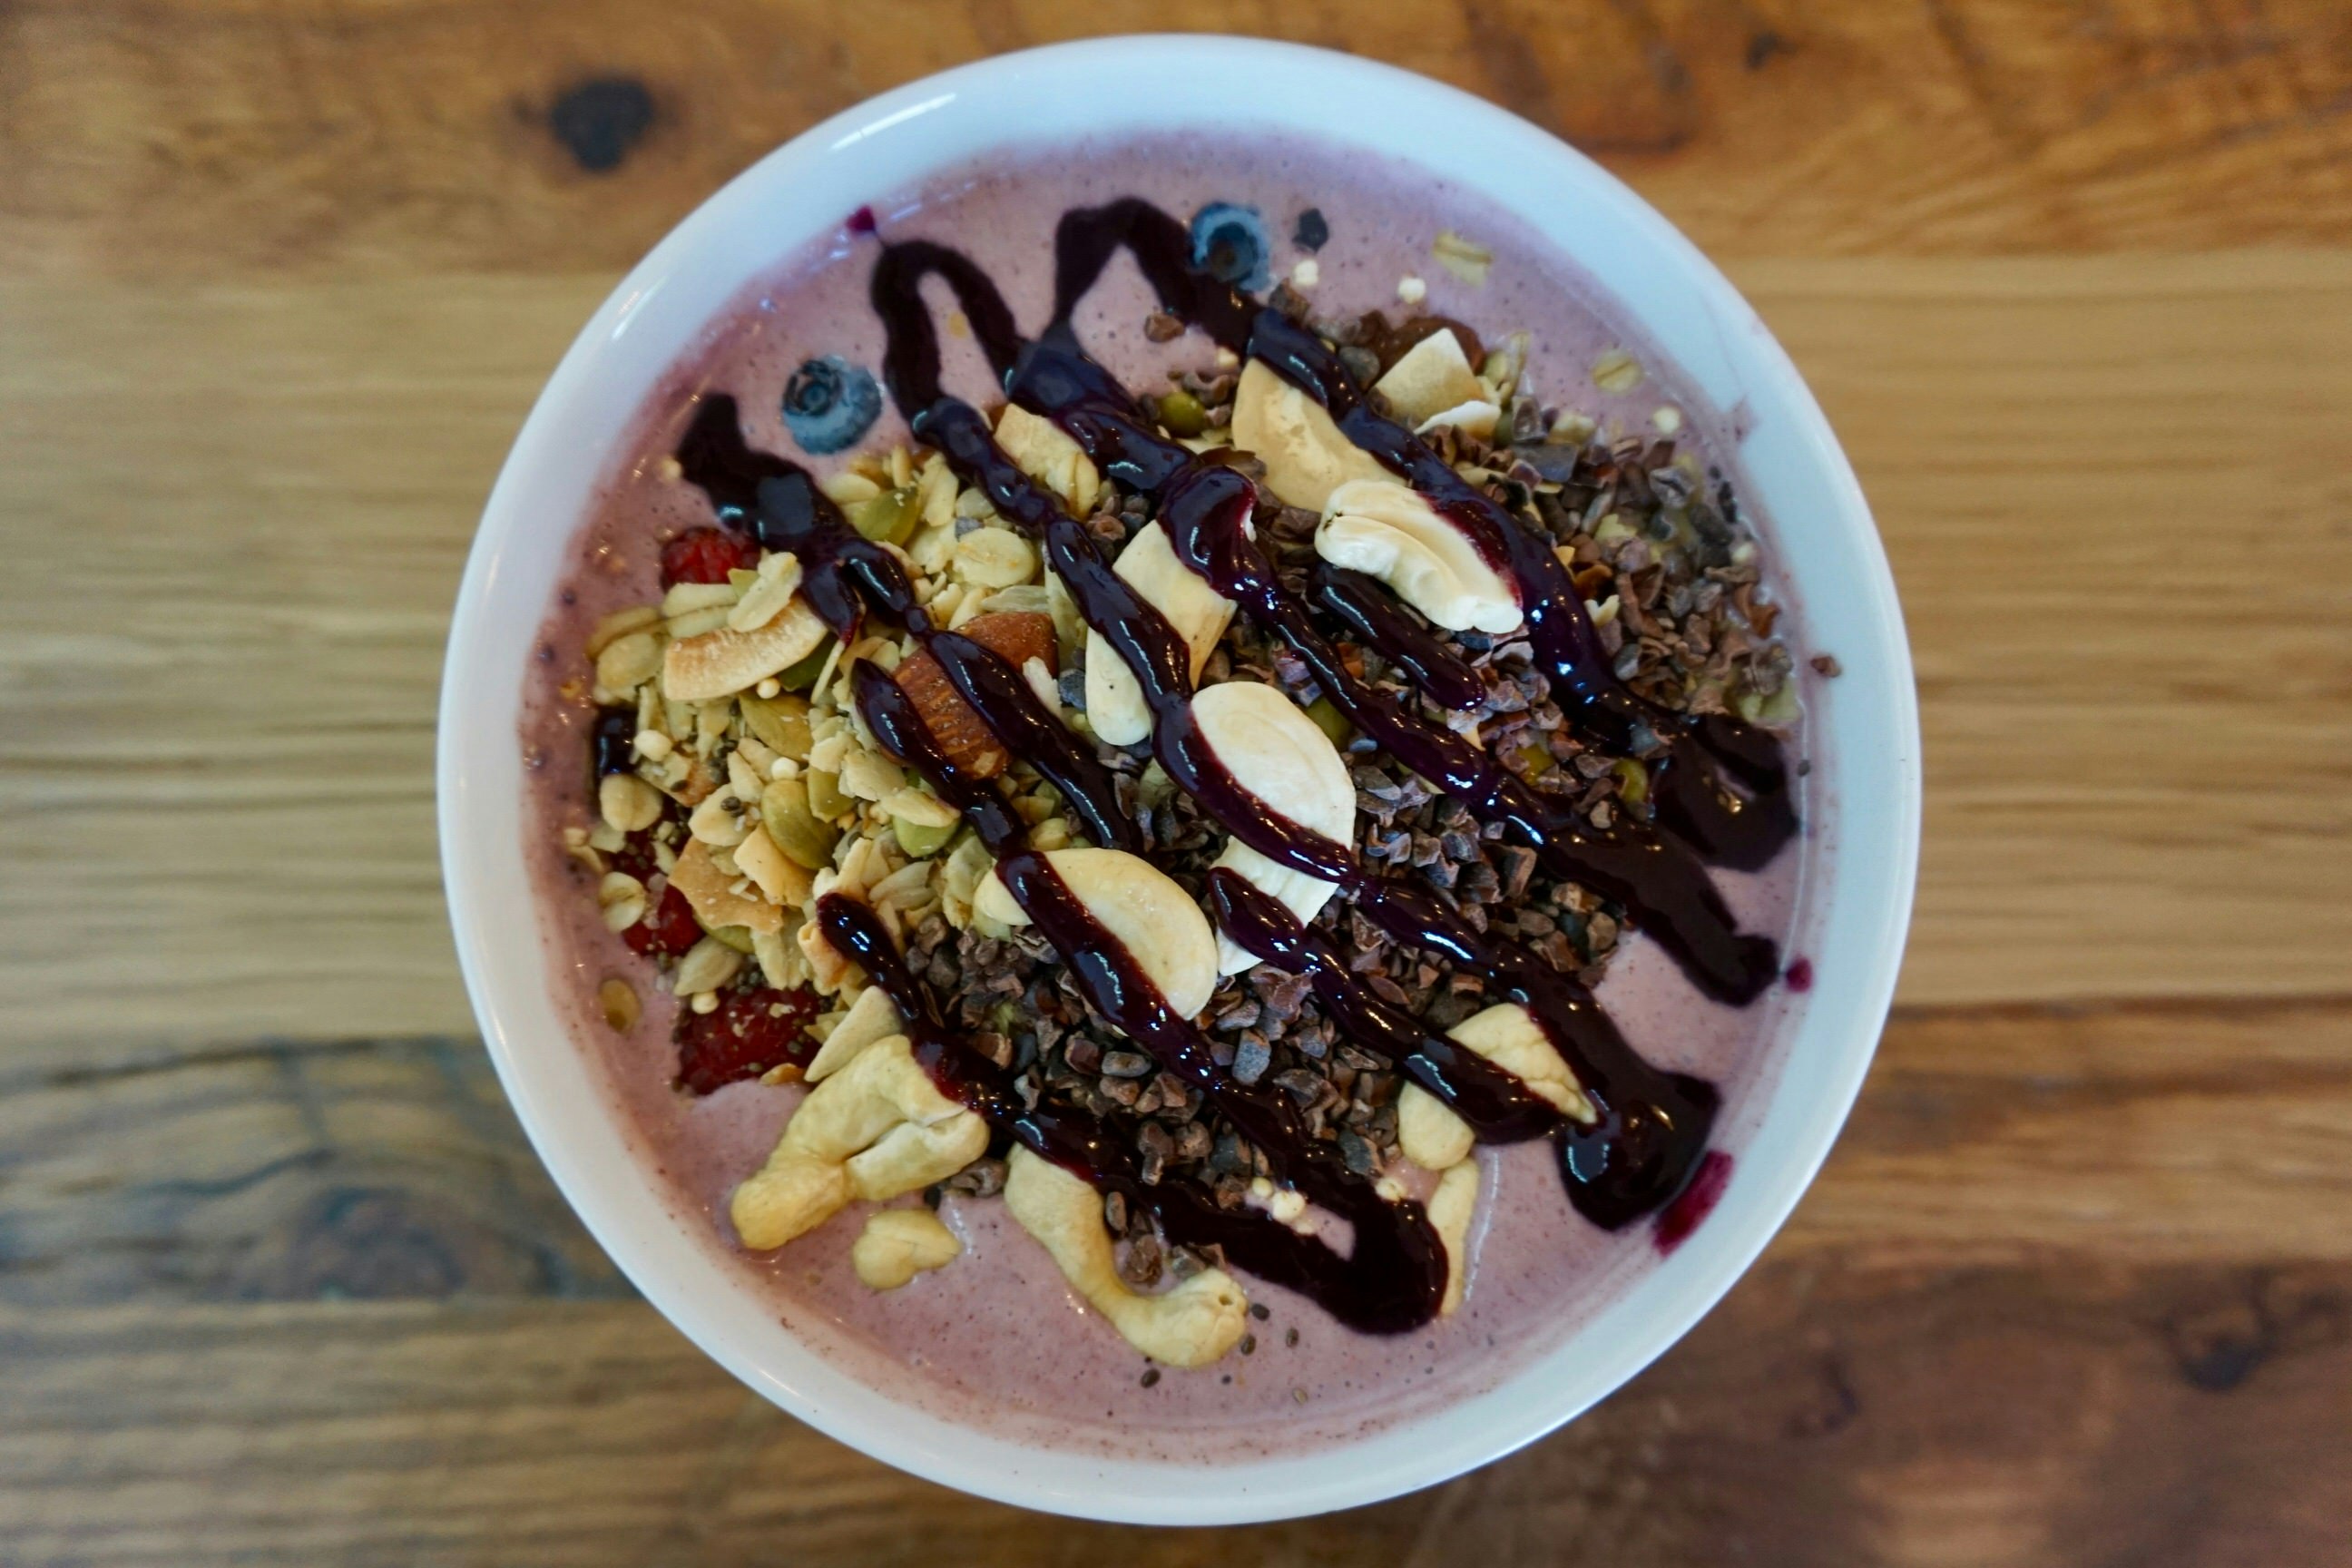 A white bowl filled with pink yogurt, nuts, granola and fresh fruits such as blueberries and raspberries, all topped with a generous serving of deep red syrup.